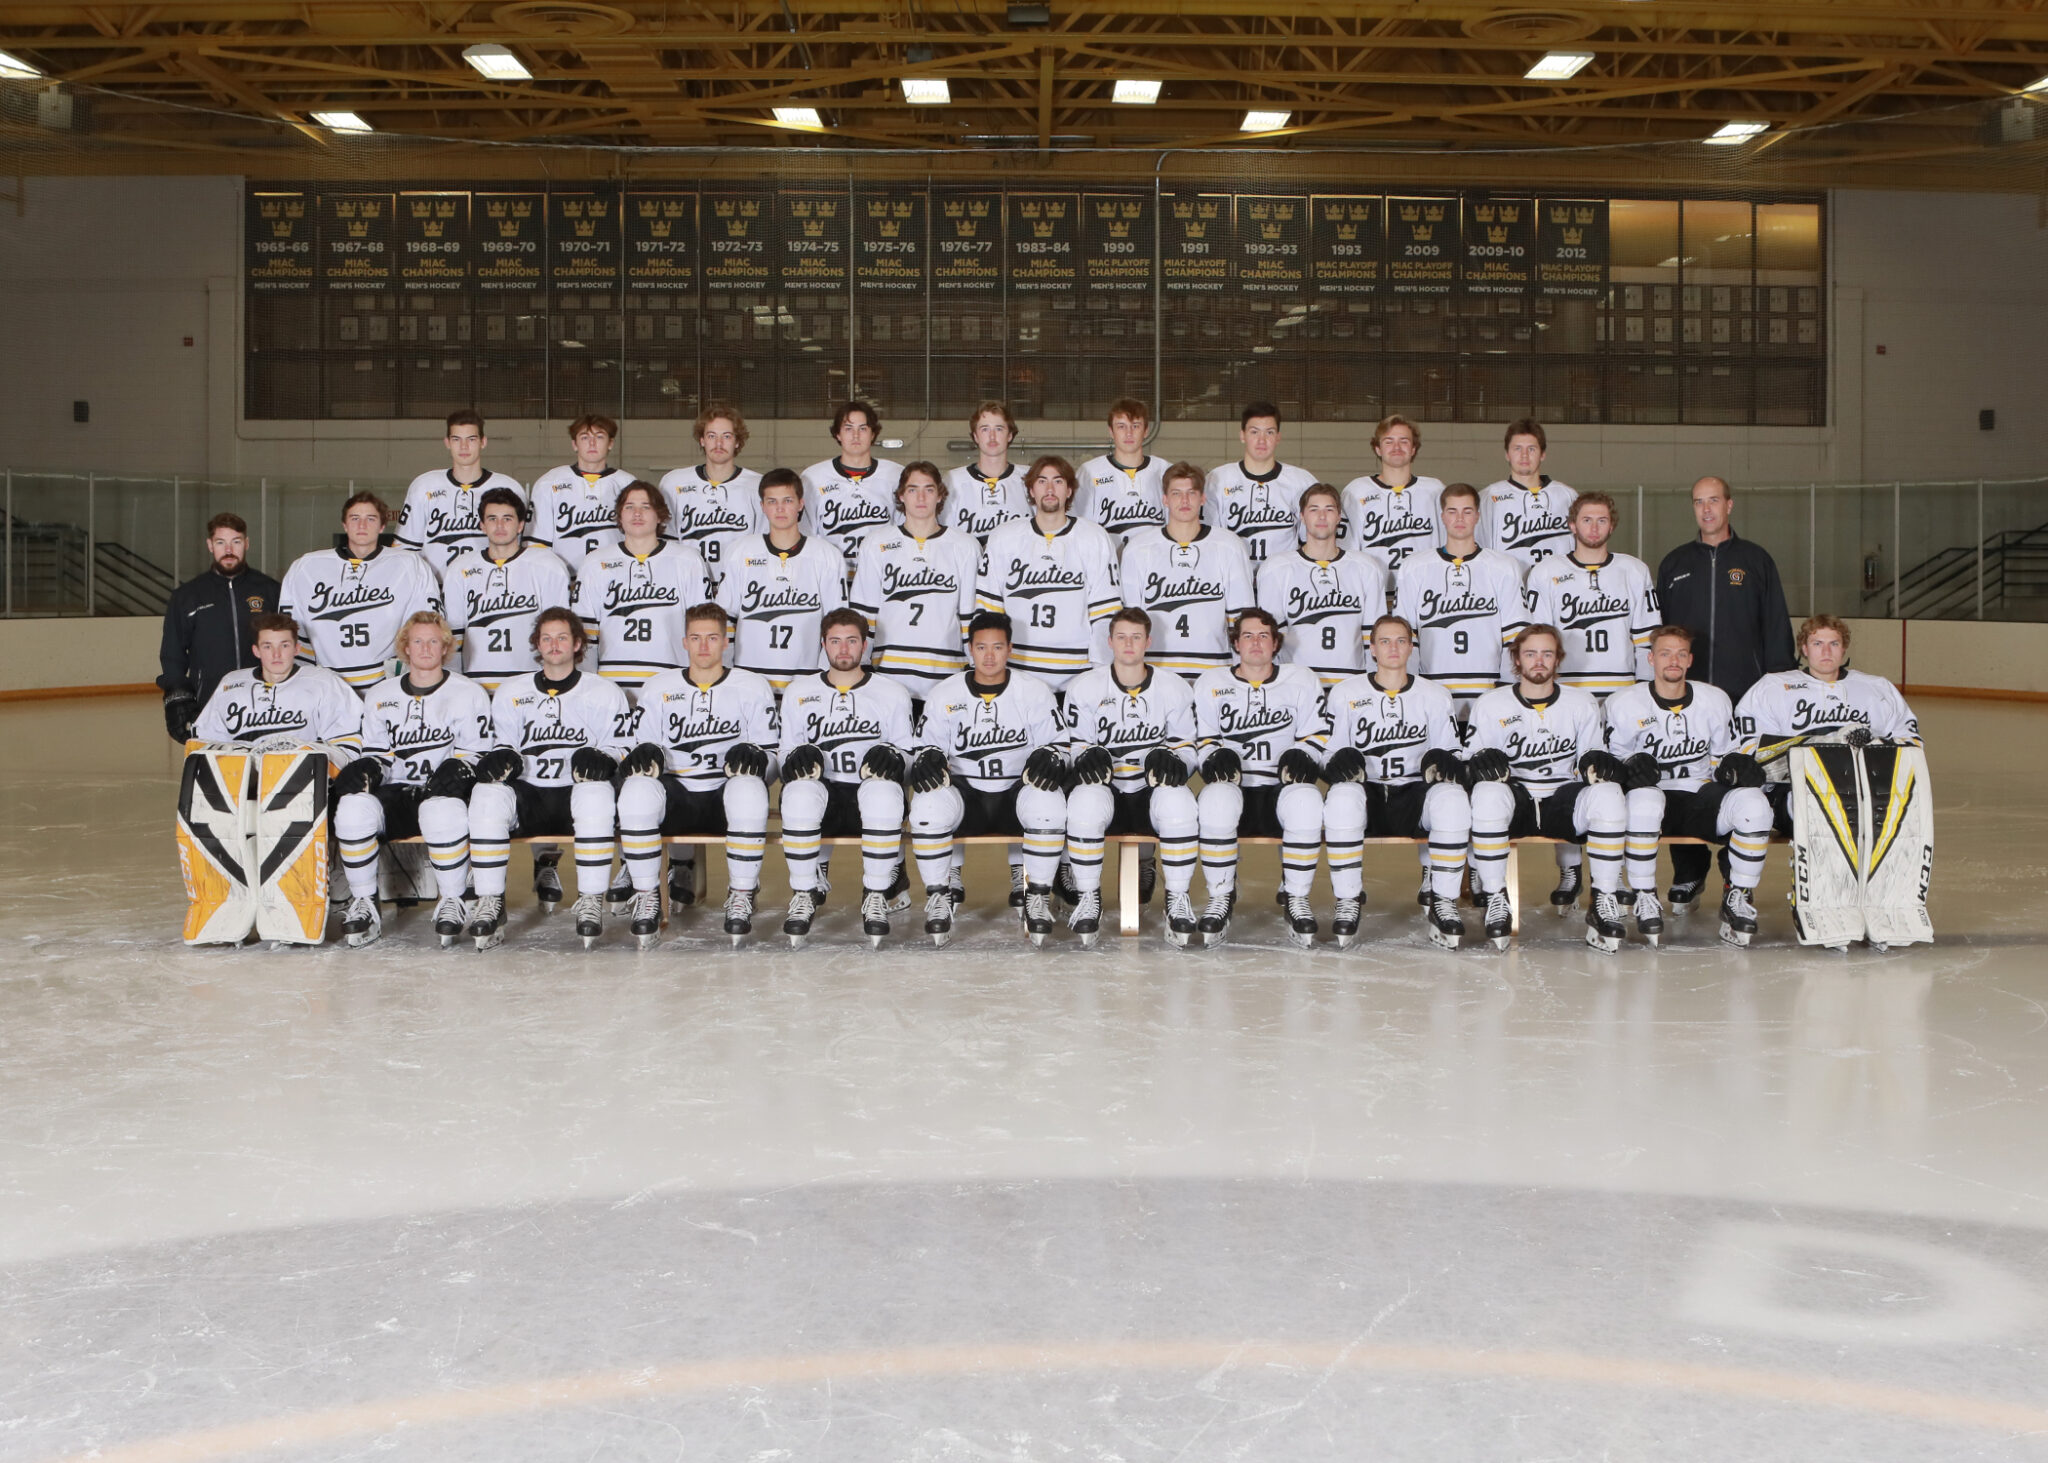 2021-22 Men’s Hockey Season Preview - Posted on October 29th, 2021 by